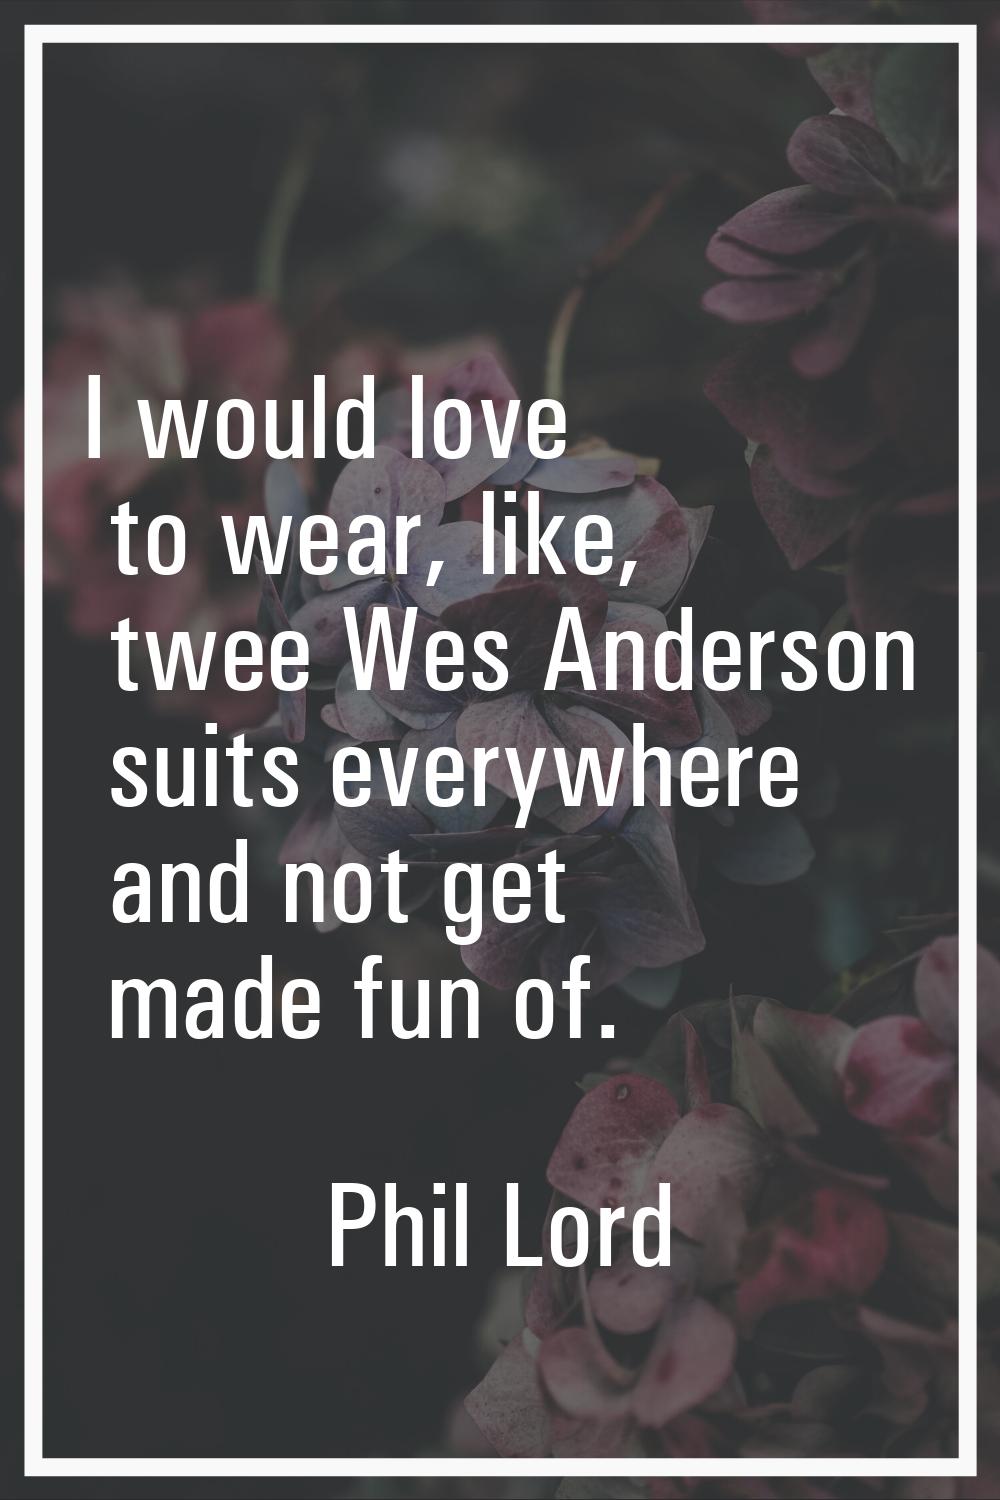 I would love to wear, like, twee Wes Anderson suits everywhere and not get made fun of.